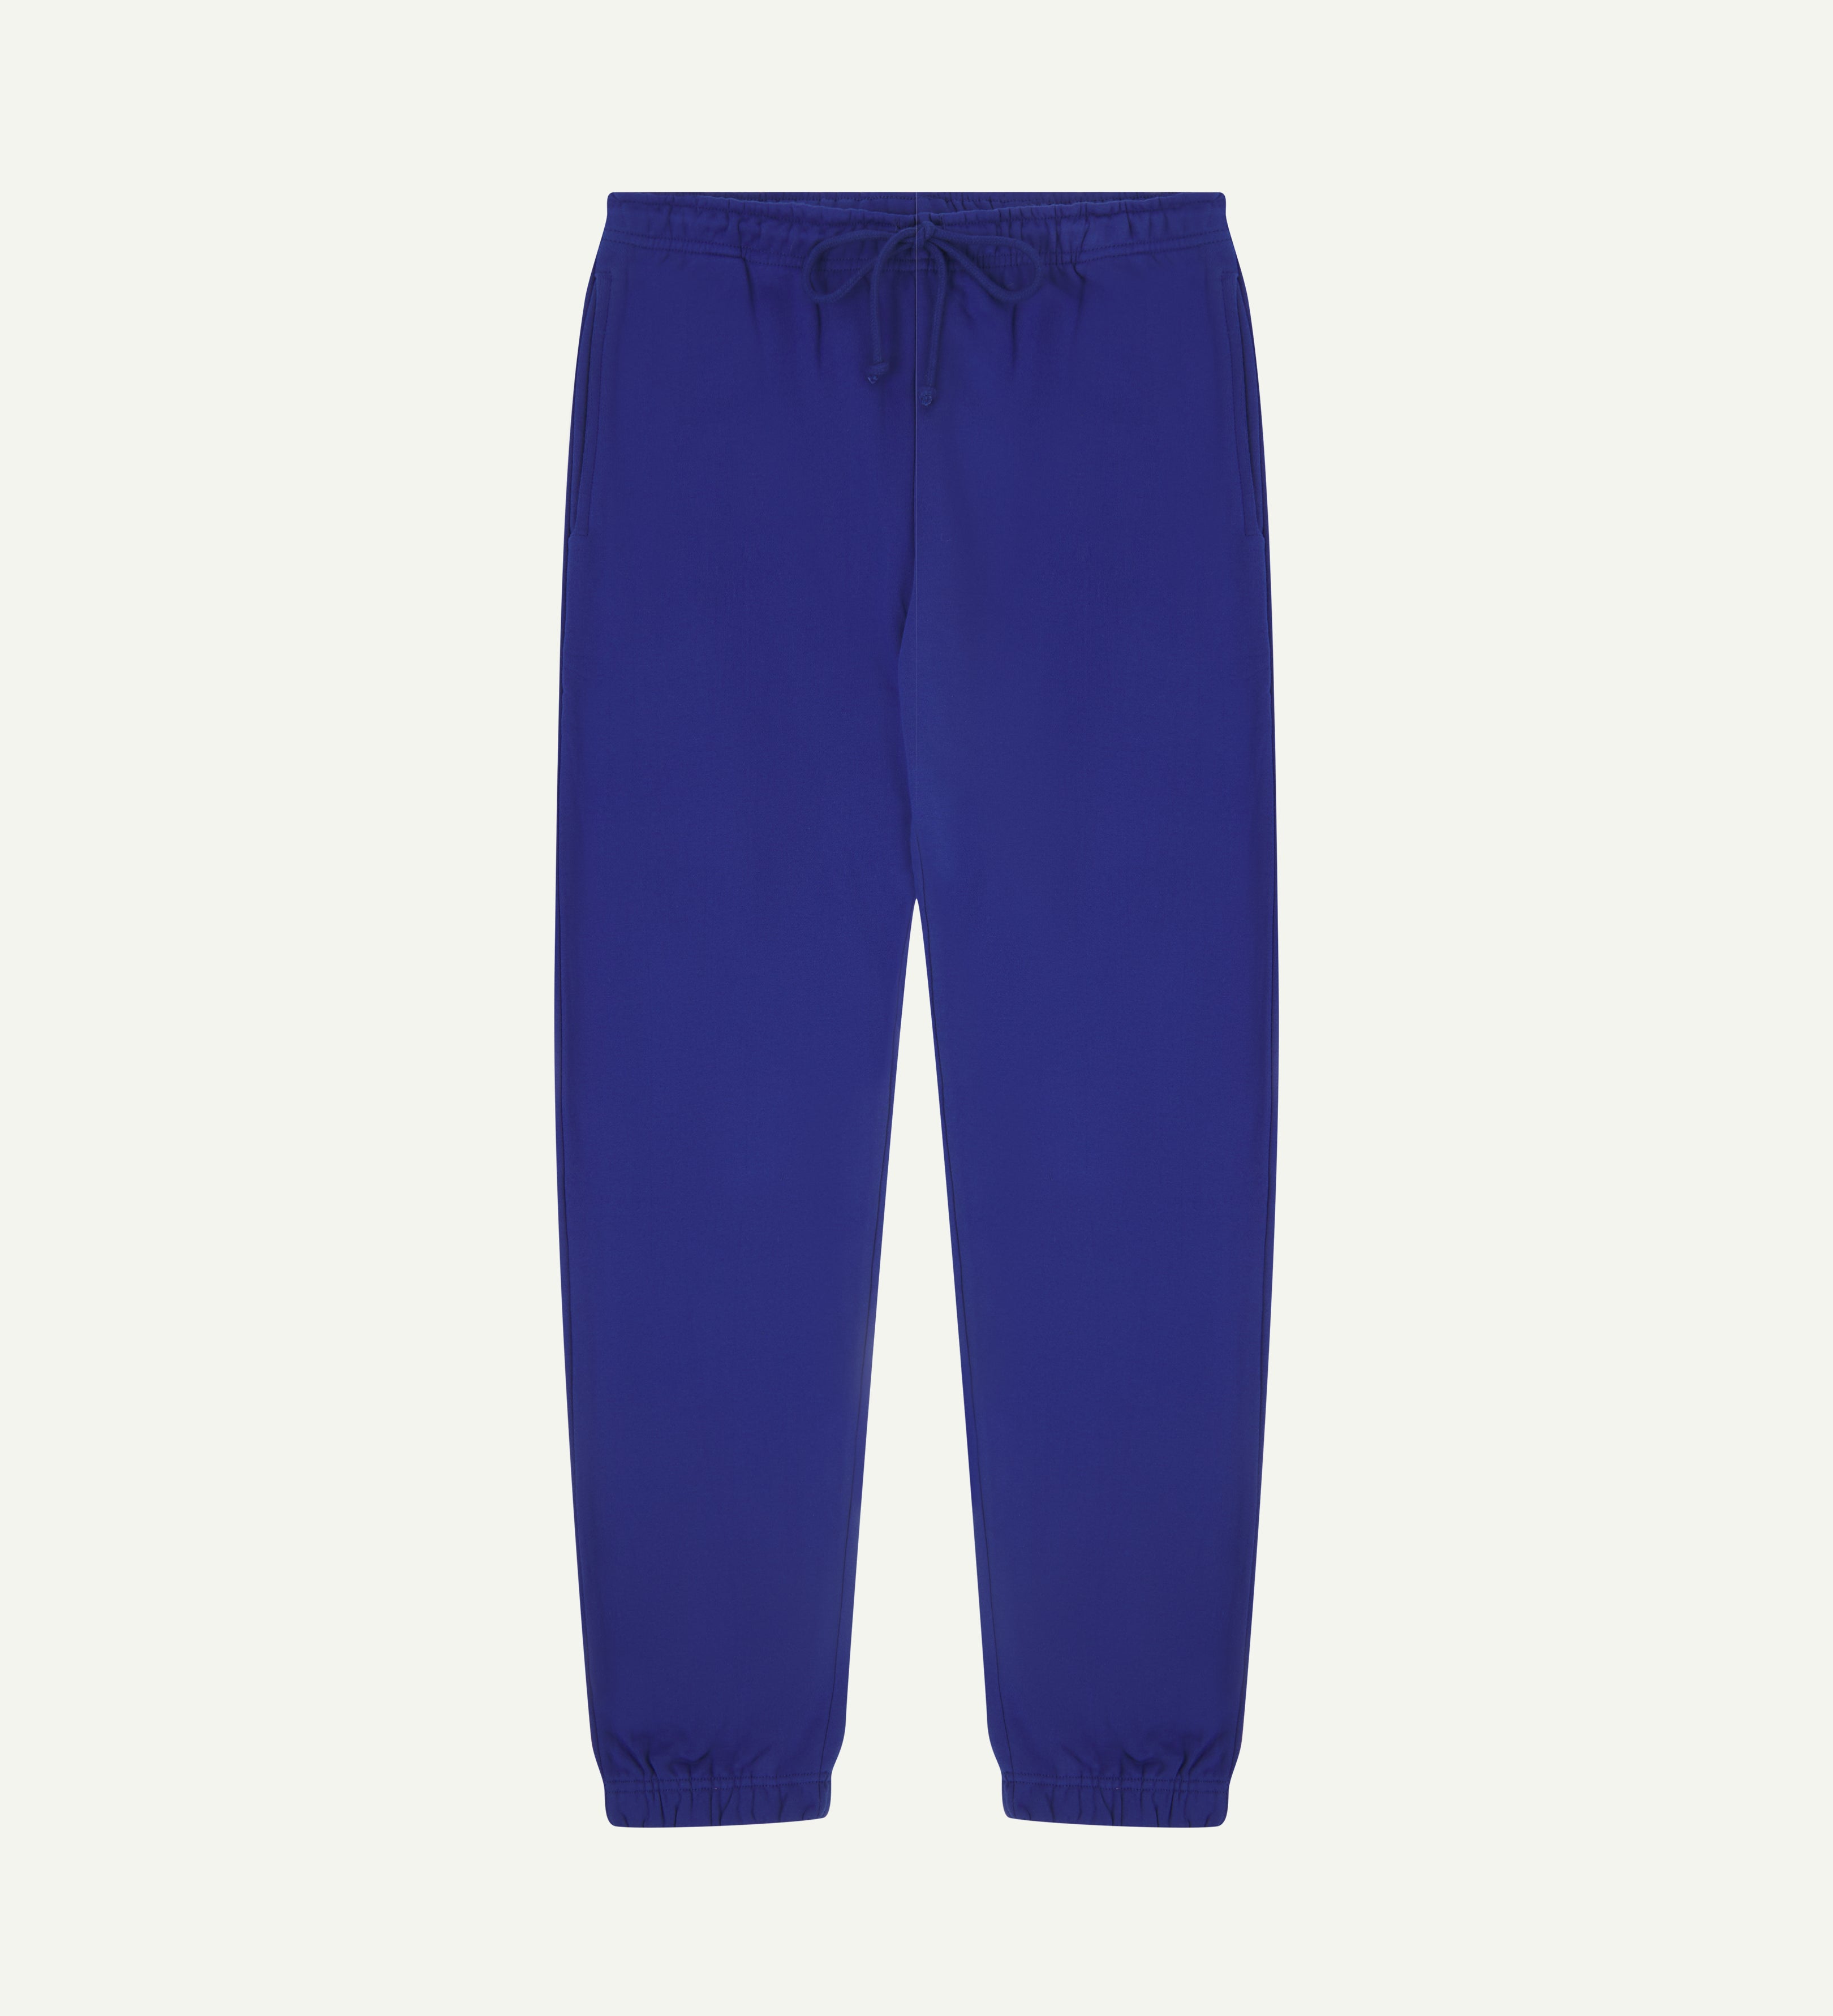 Front view of bright blue organic cotton Jogging Pants for men by Uskees.